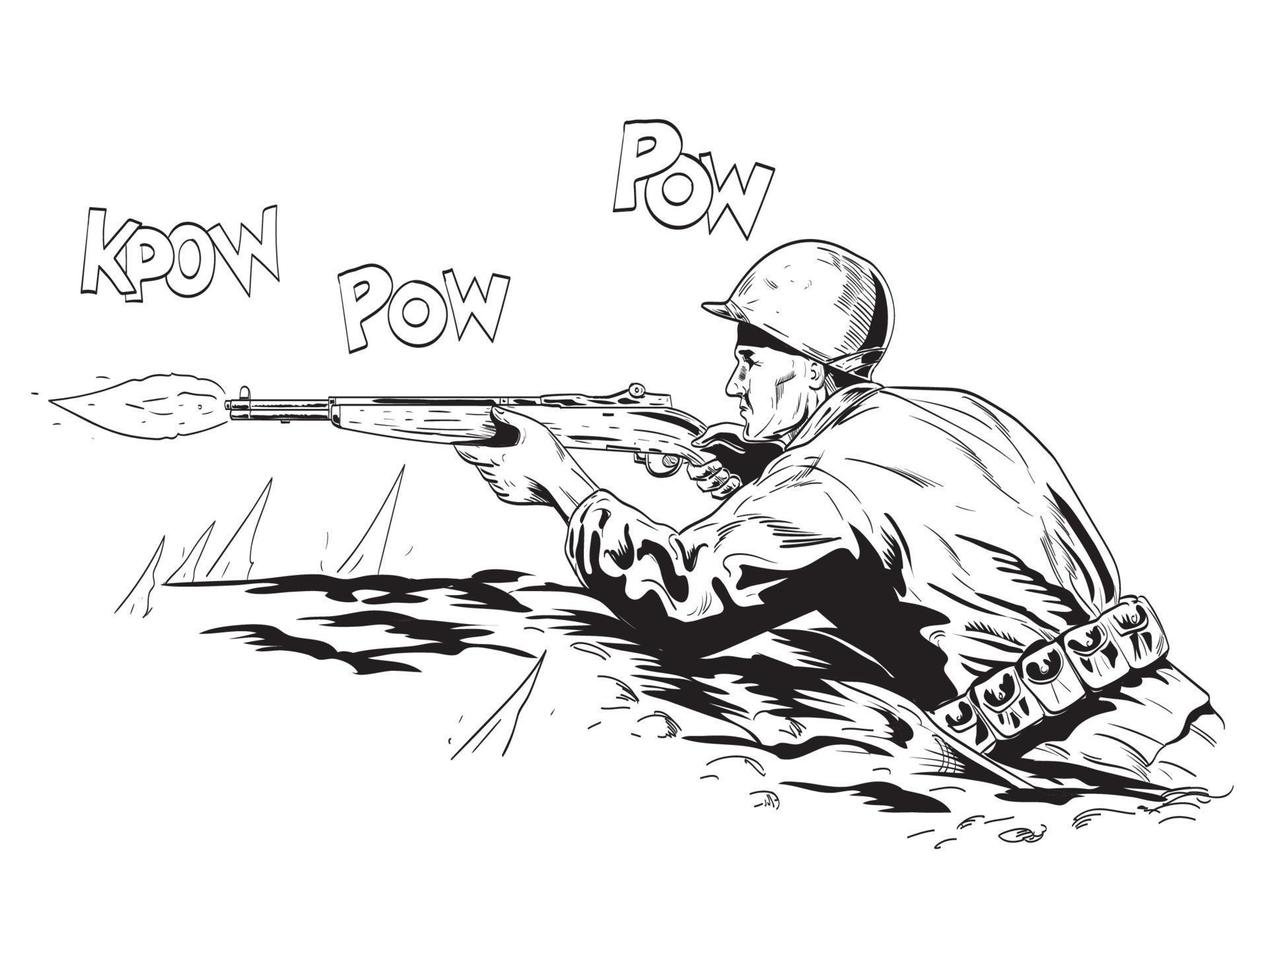 World War Two American Gi Soldier Aiming Firing Rifle in Foxhole Side View Comics Style Drawing vector